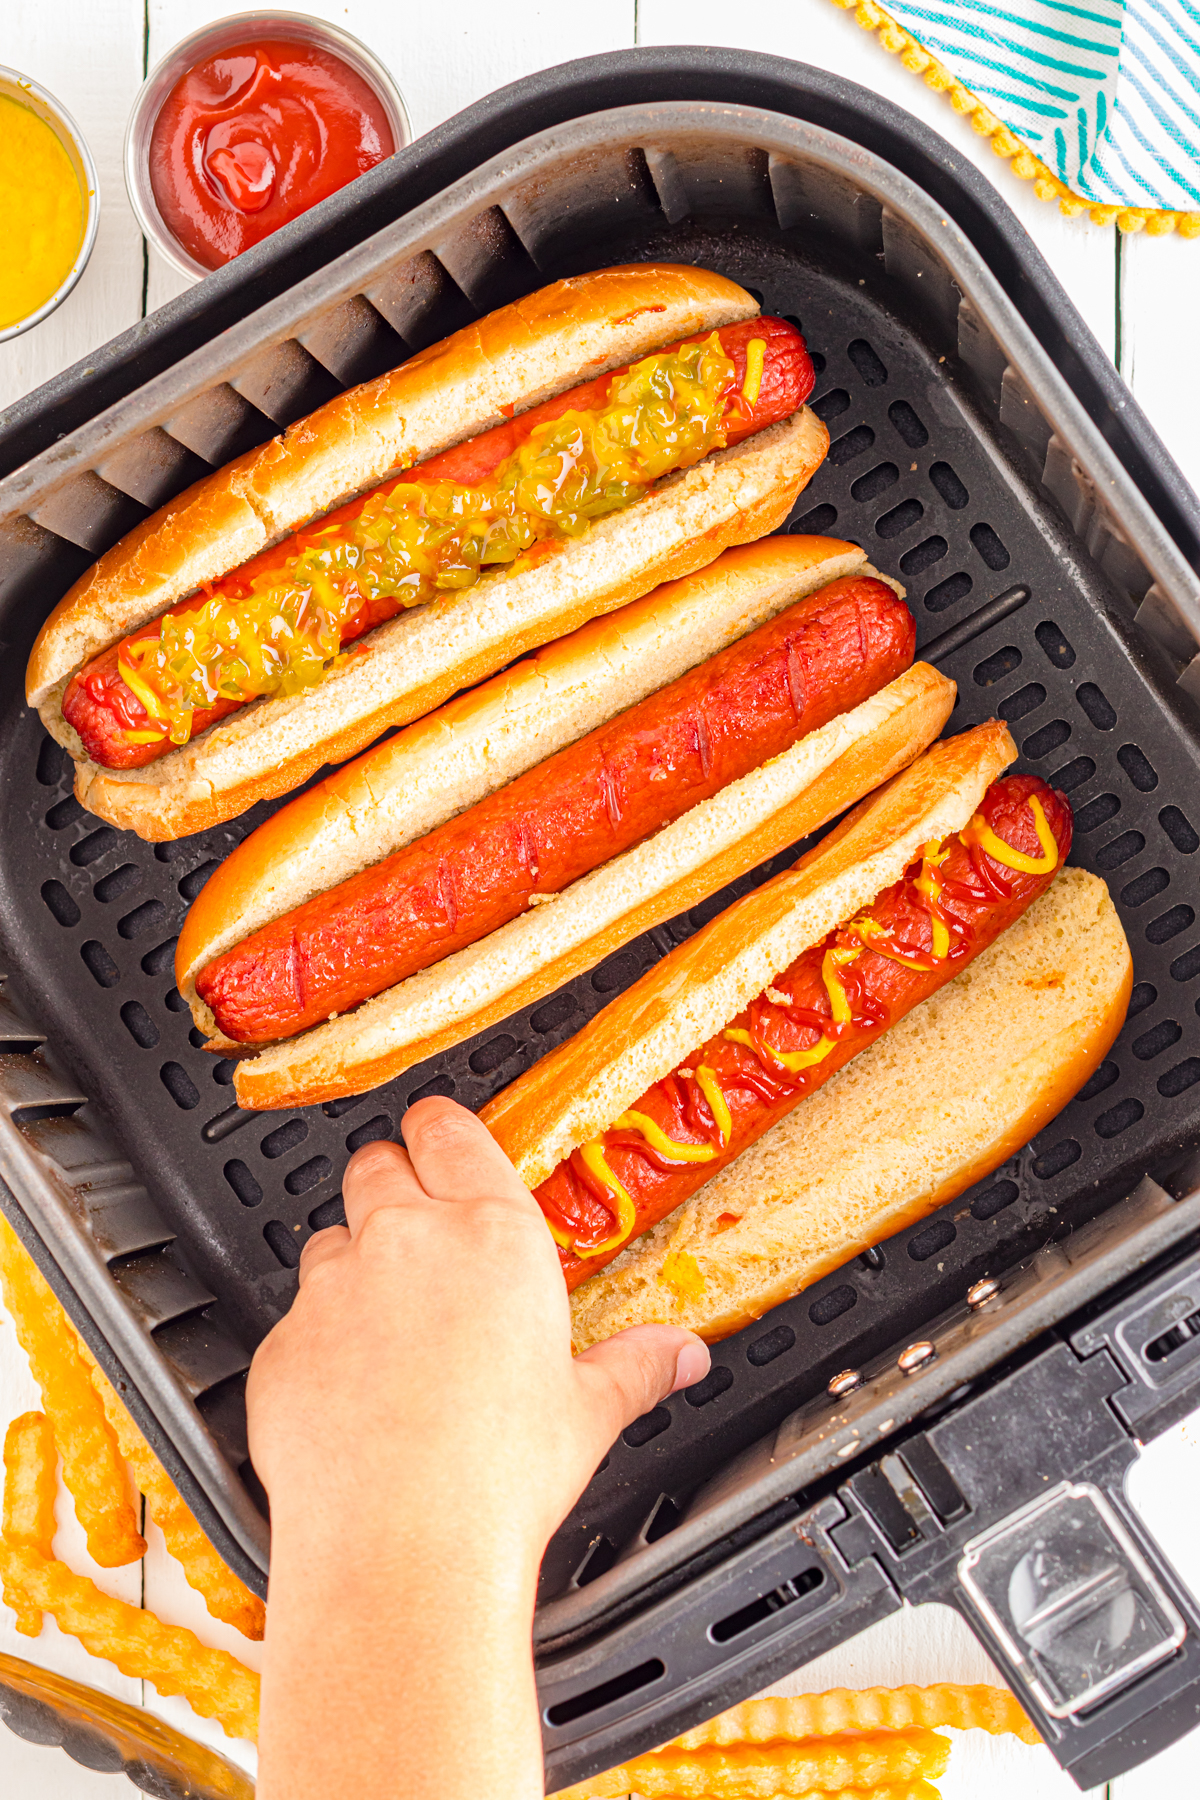 Child's hand grabbing a hot dog from the air fryer.